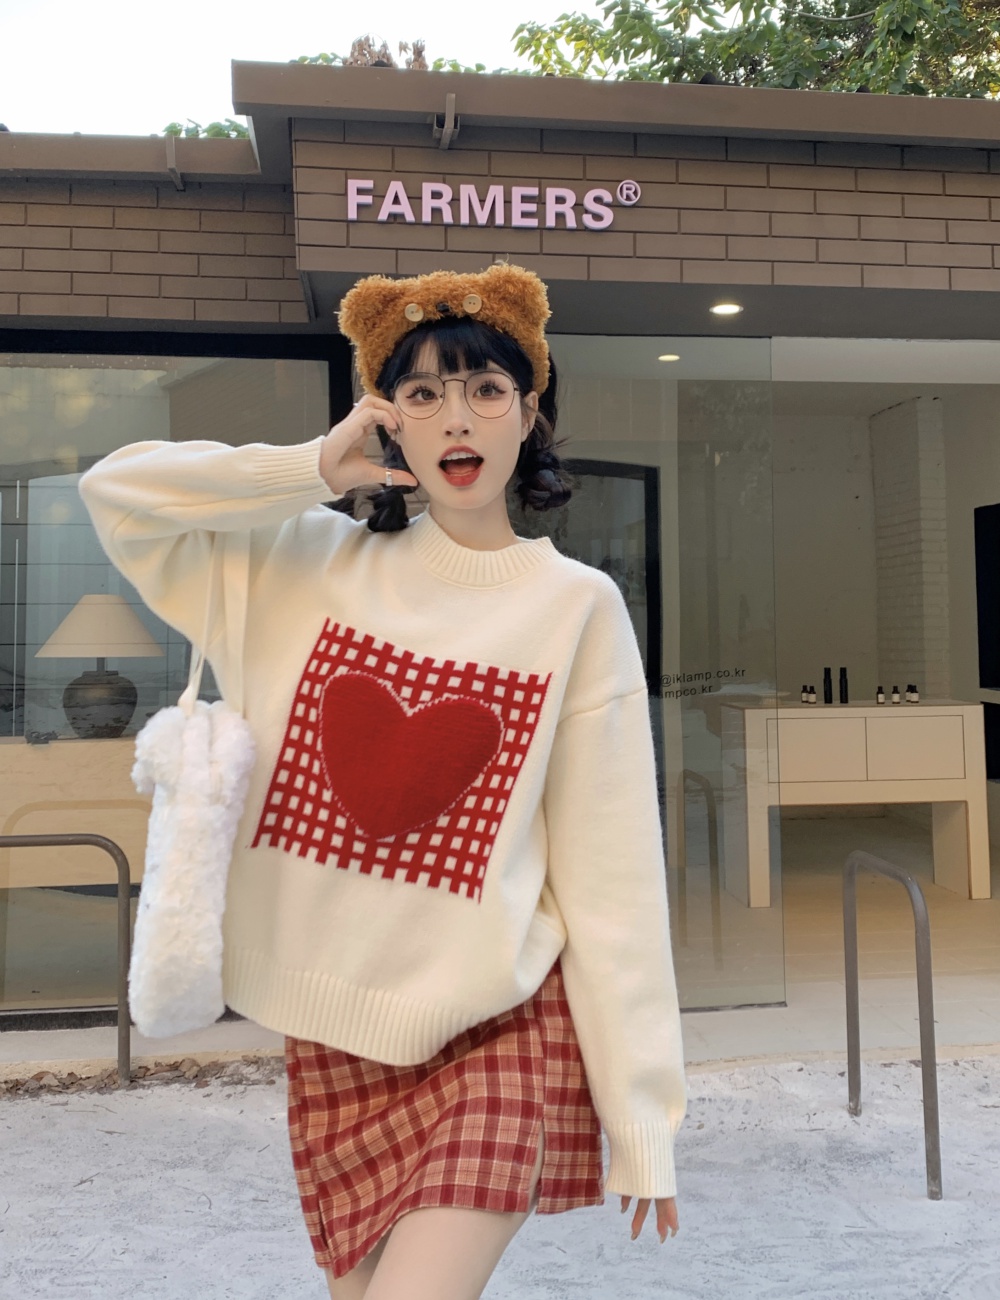 Fashion pattern winter pullover was white sweater for women